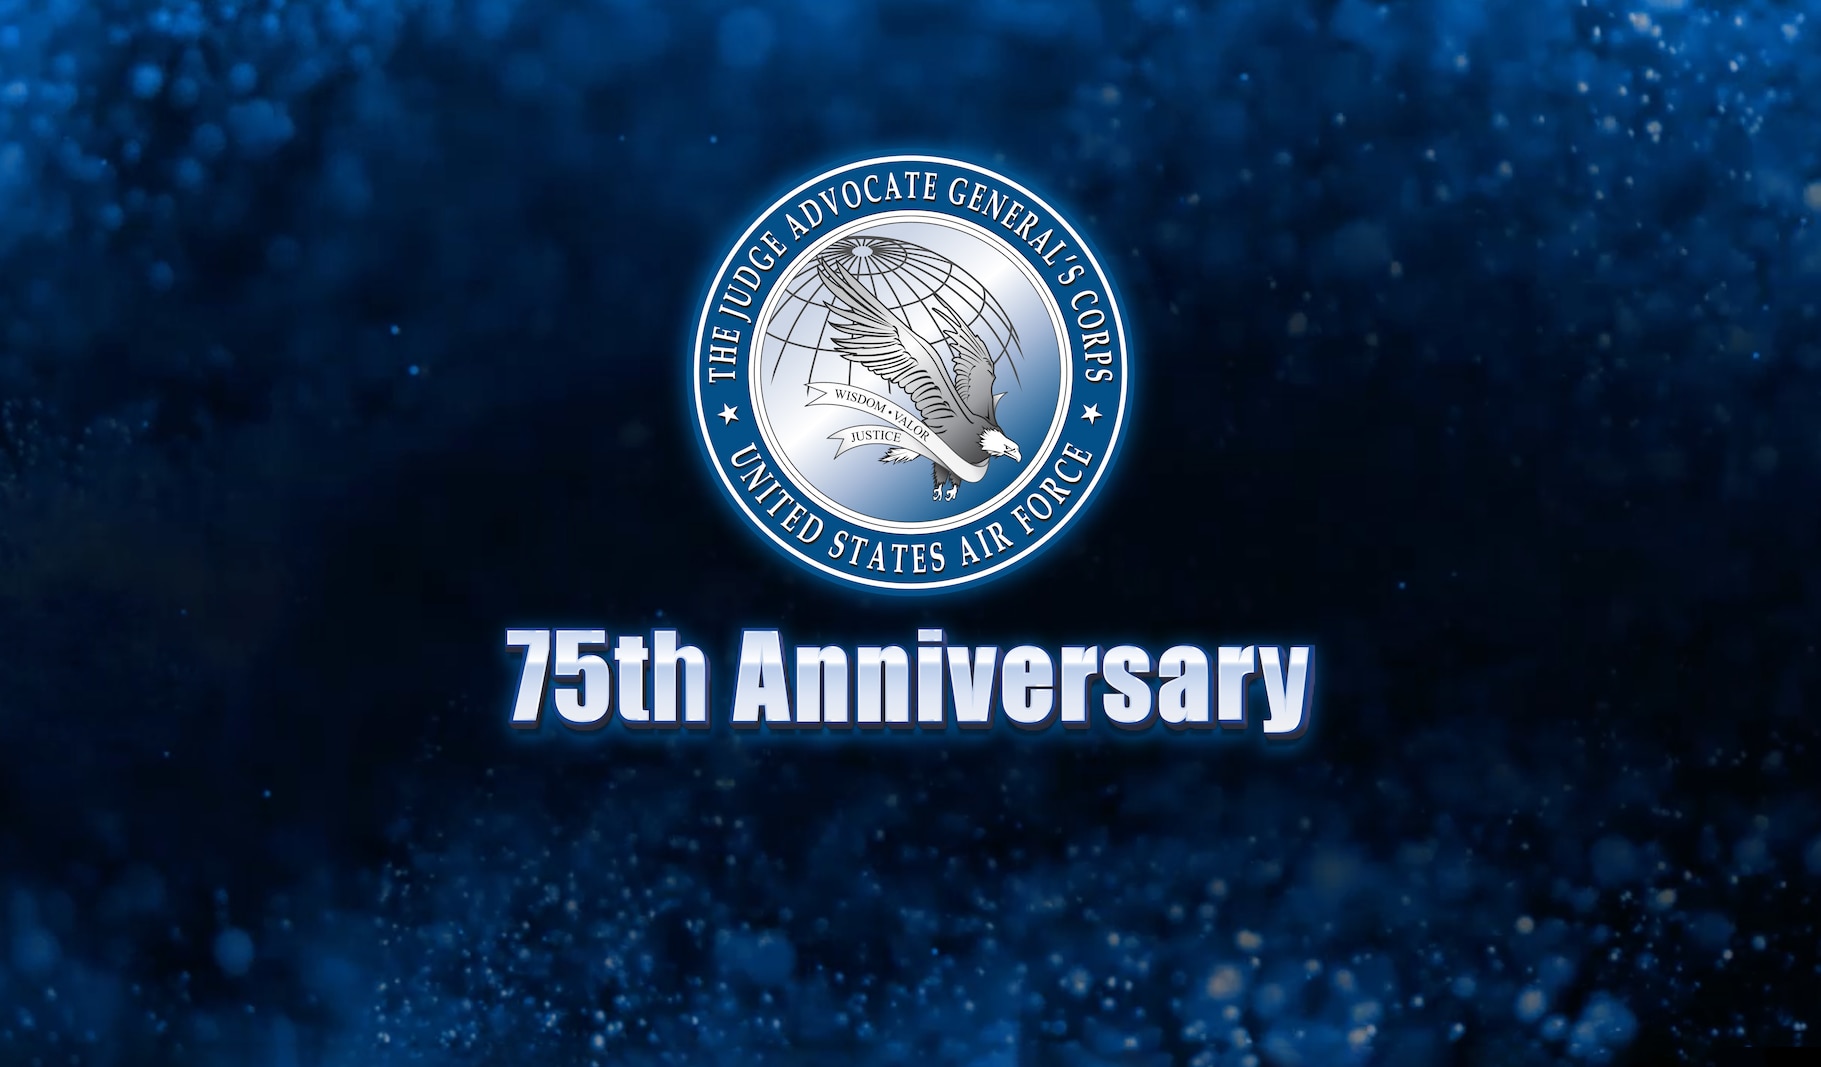 JAG Corps seal and 75th Anniversary text on dark blue background filled with sparkling particles. Modified motion graphic templates © Animoplex & Wavebreak Media/adobe.com [image is not public domain]